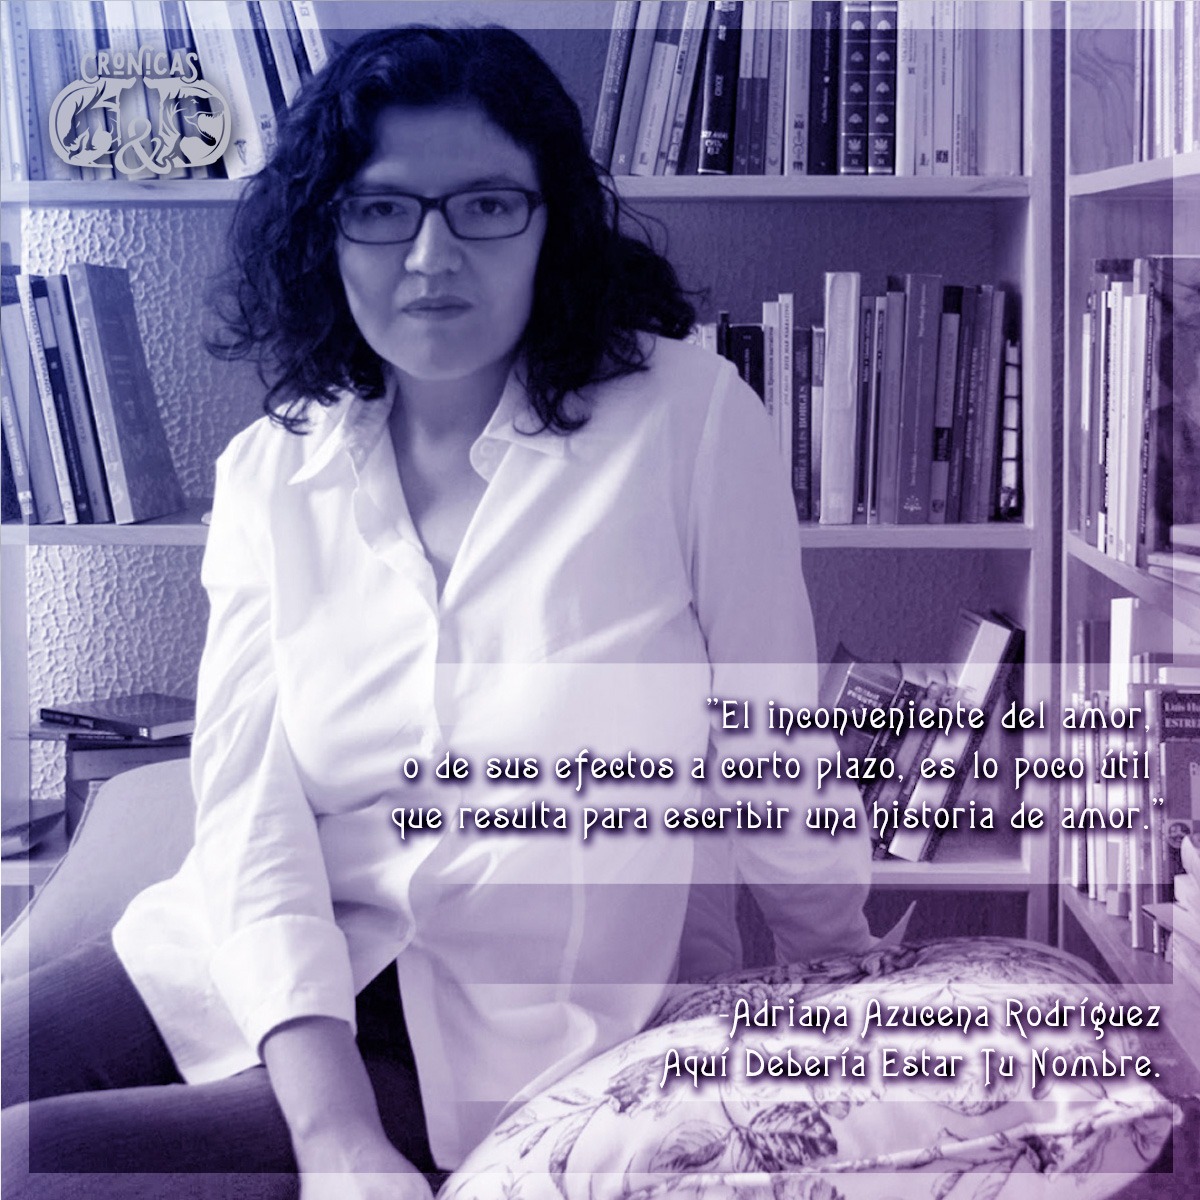 'The downside of love, or its short-term effects, is how useless it is for writing a love story.' -Adriana Azucena Rodríguez, Aquí Debería Estar Tu Nombre.

#Escritoras #EscritorasMexicanas #DíaDeLaMujer #MesDeLaMujer #FemaleAuthors  #WomensHistoryMonth #WomensMonth #WomensDay